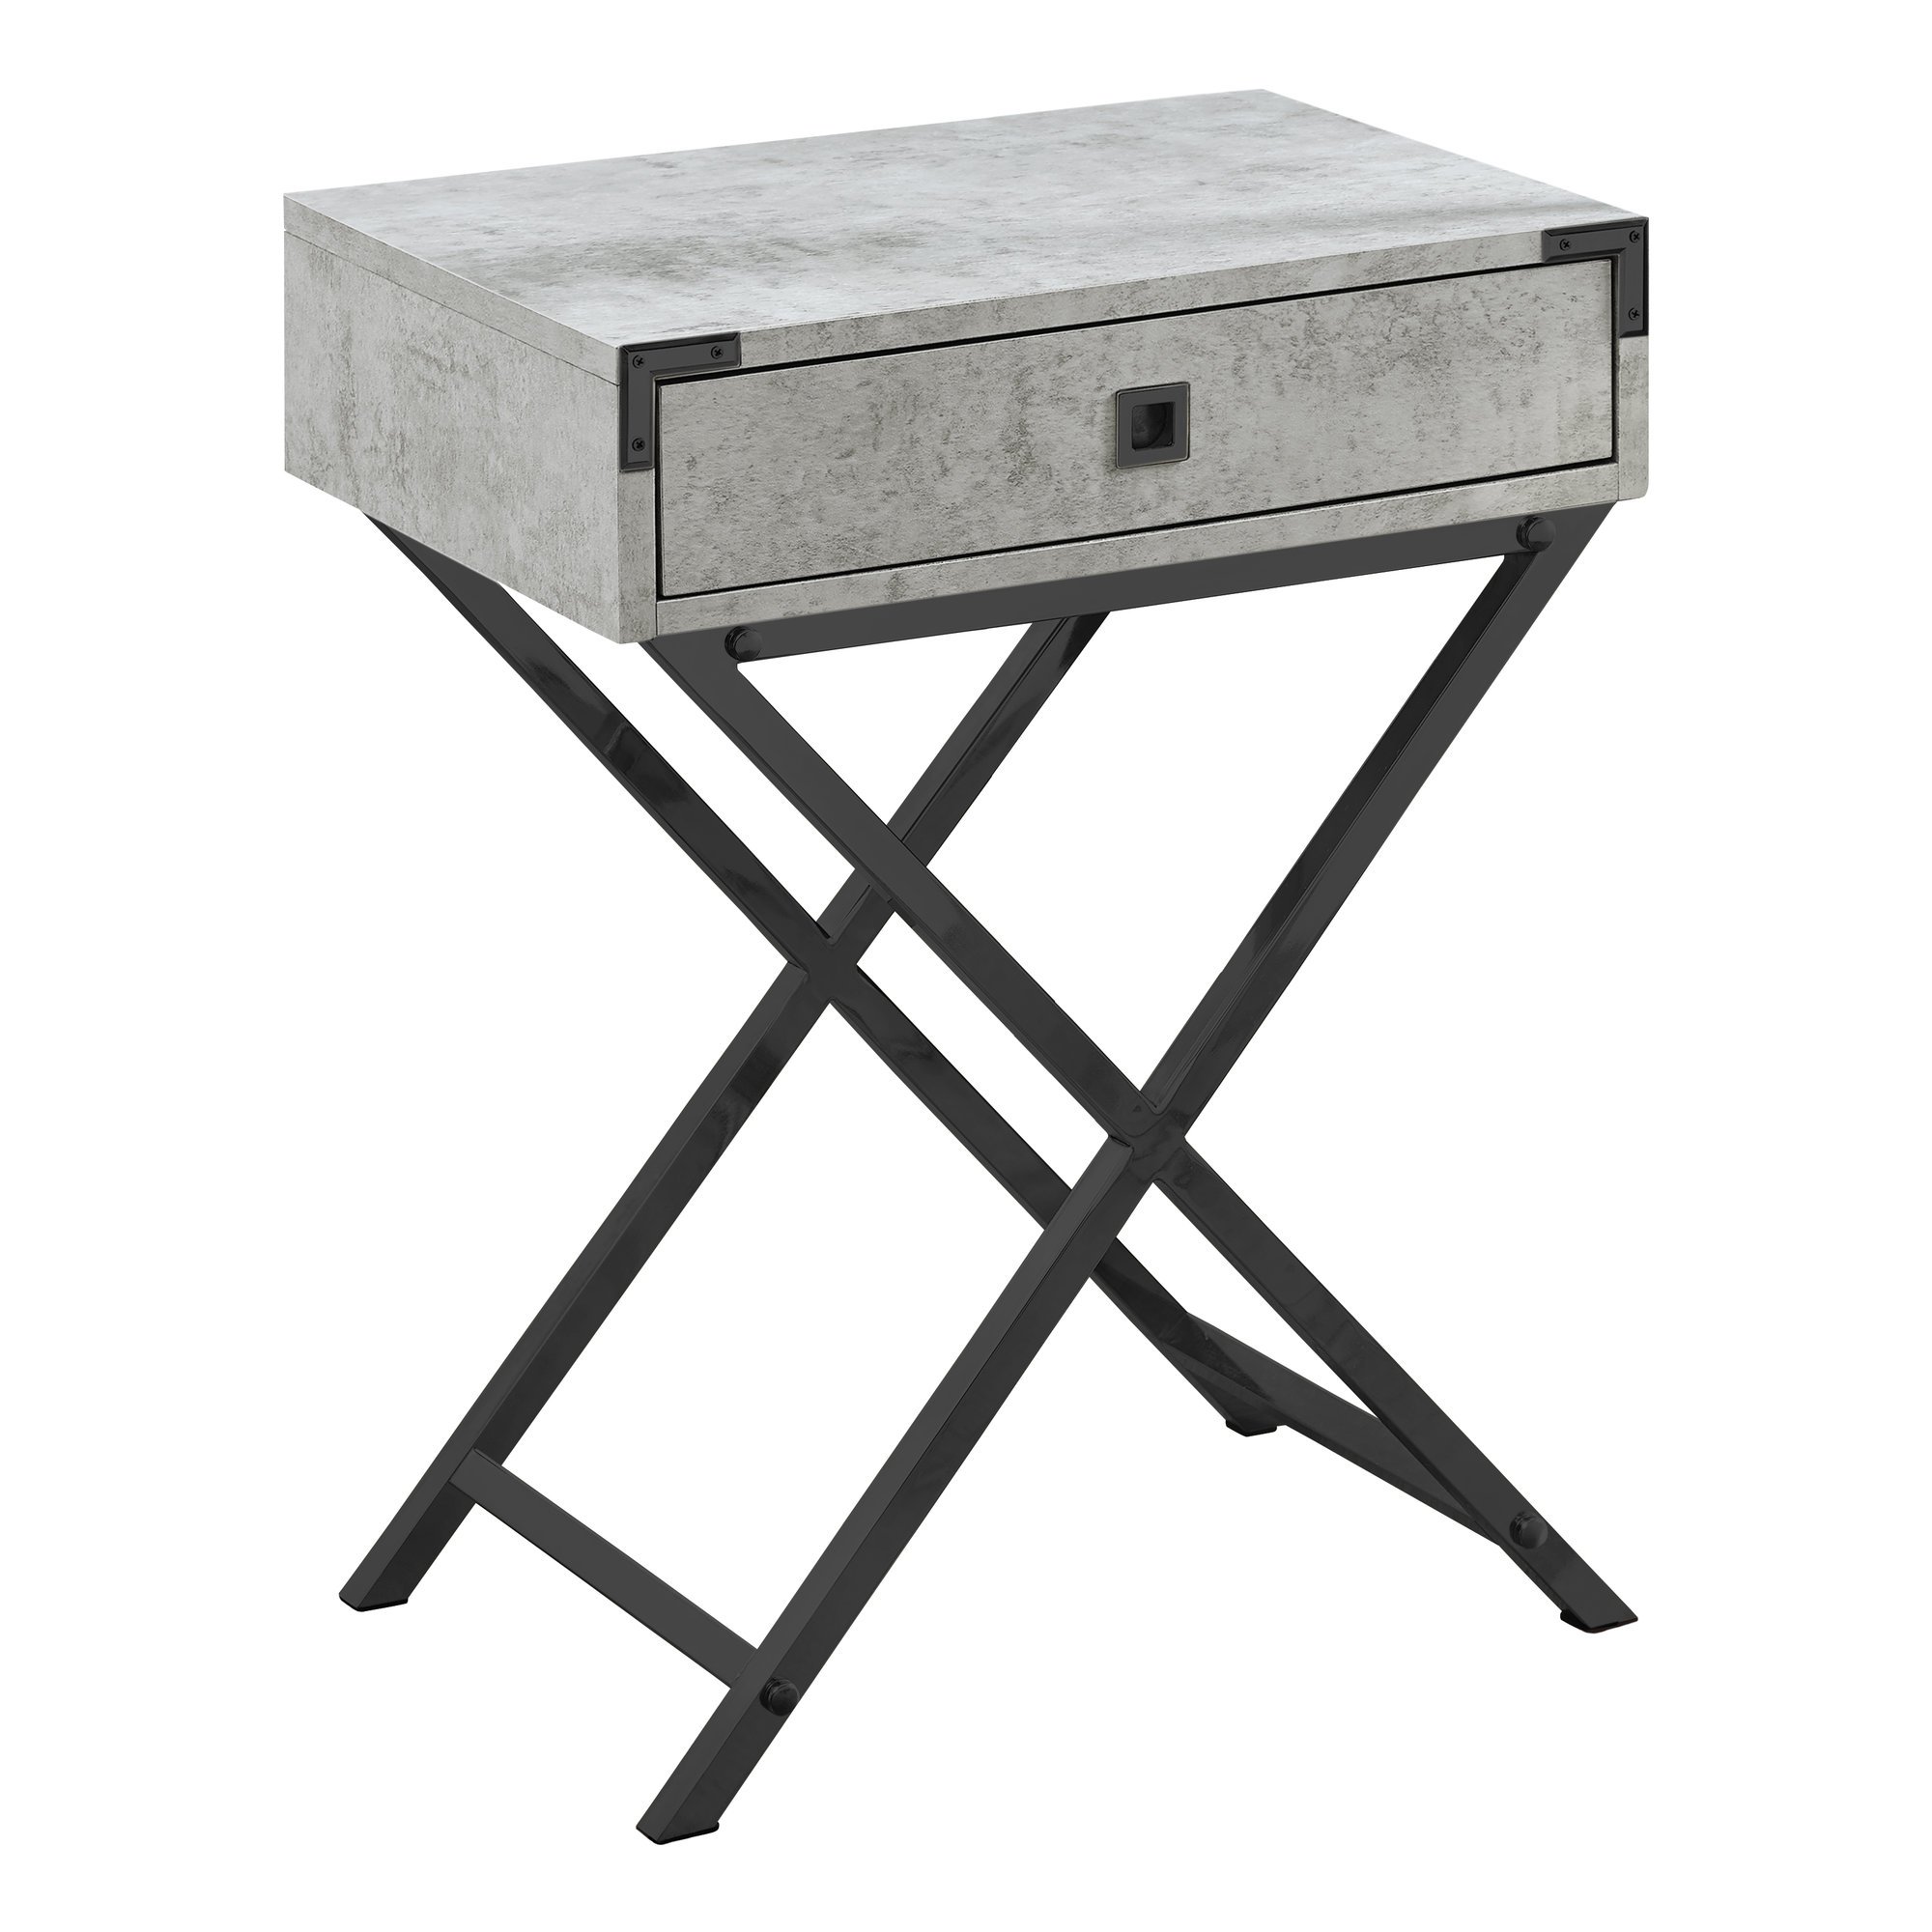 monarch mdf and metal accent table grey finish gwg dining chair covers target contemporary furniture edmonton ott sofa small decorative chest drawers large corner drum stool base